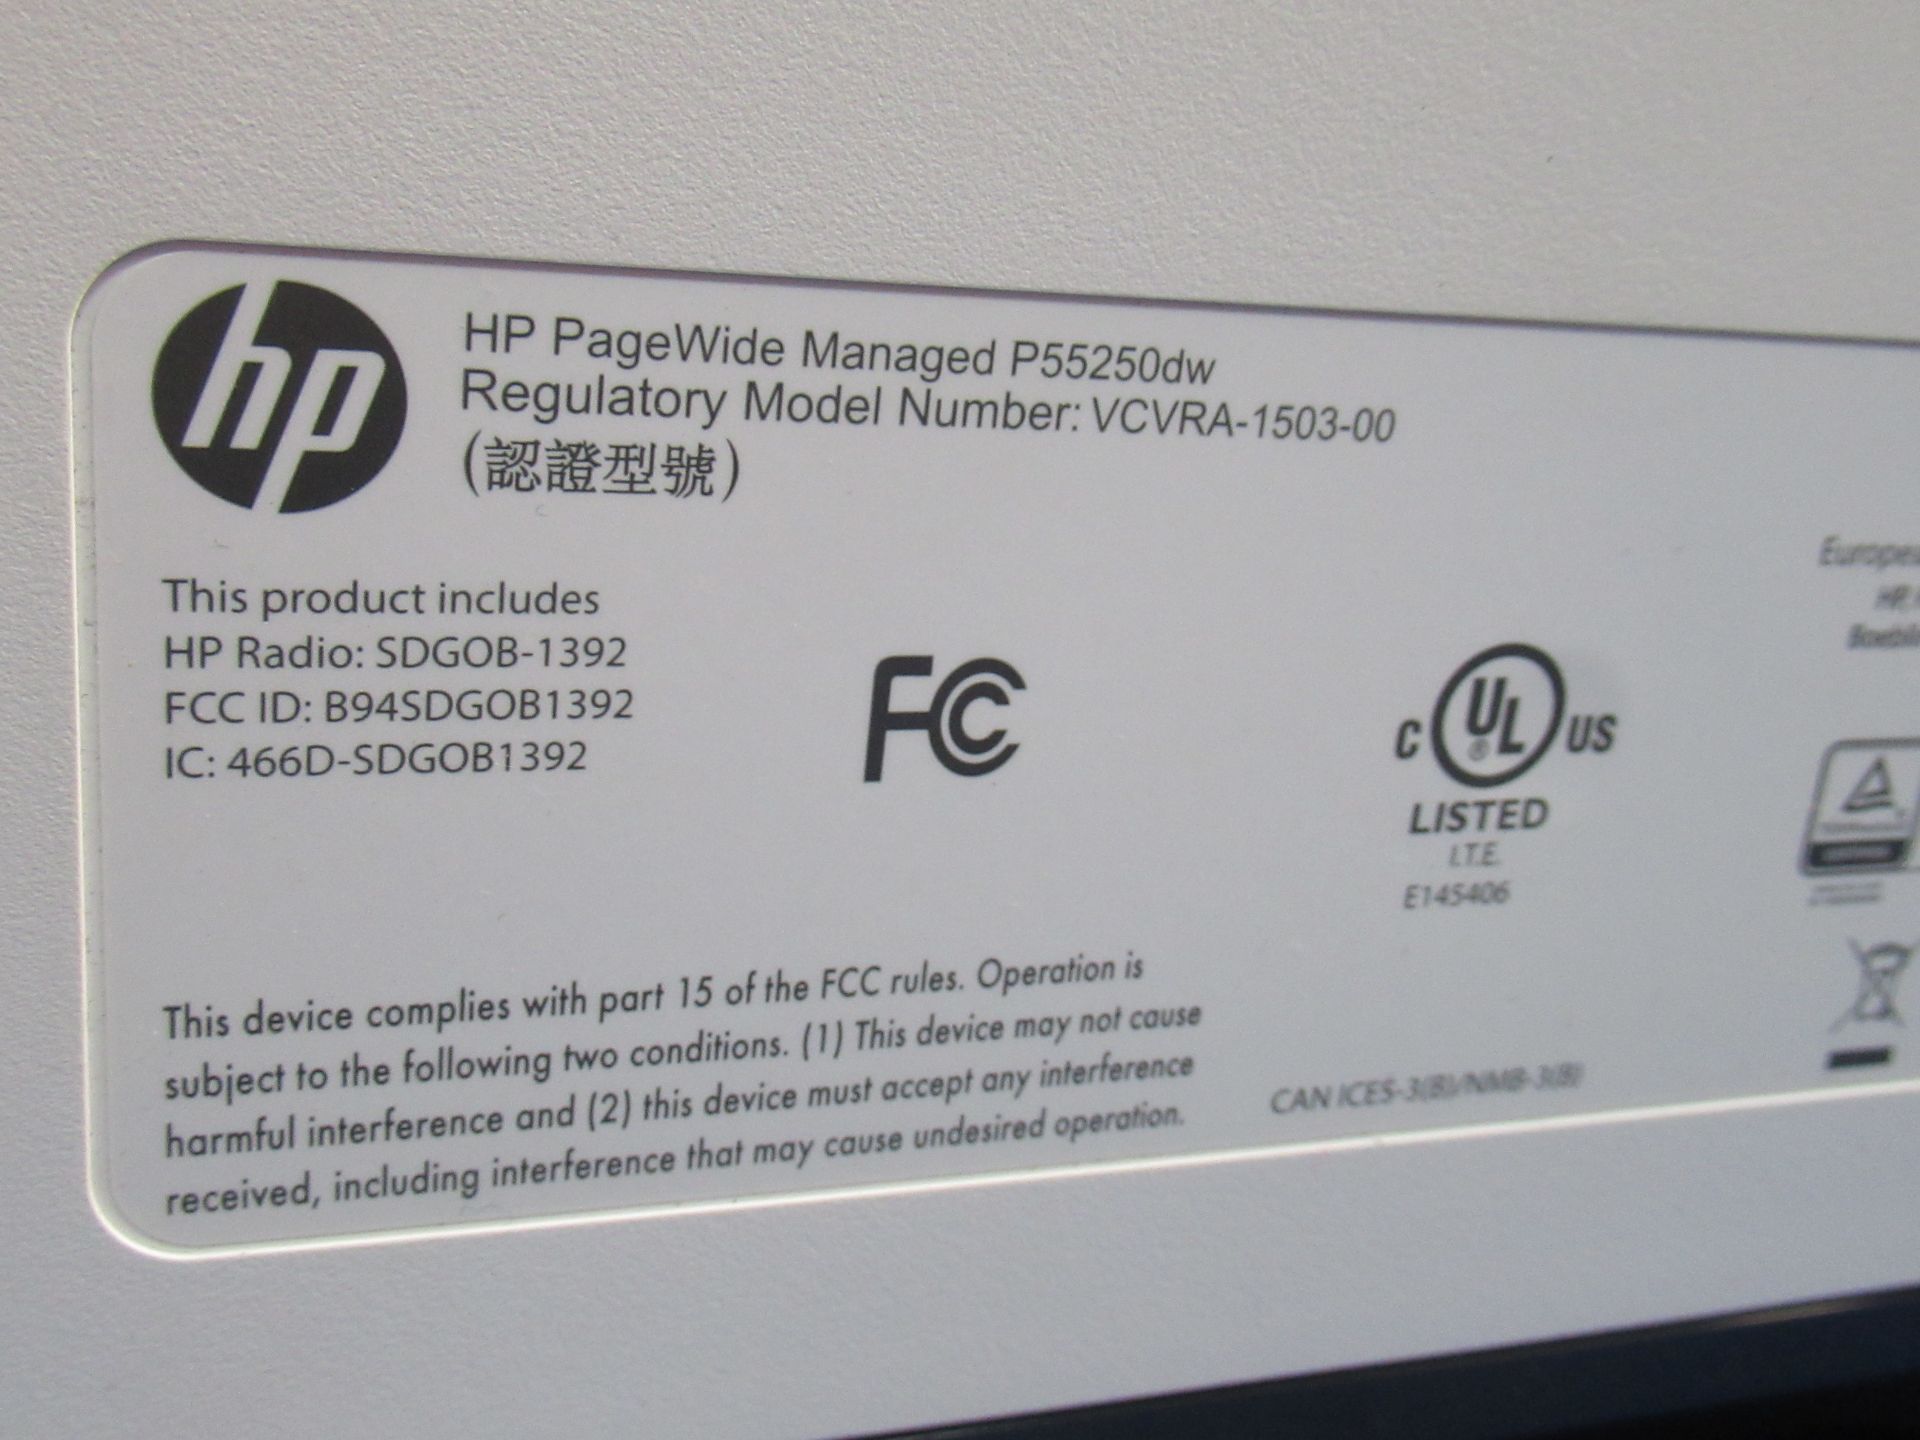 HP Page wide managed P55250dw printer - Image 4 of 5